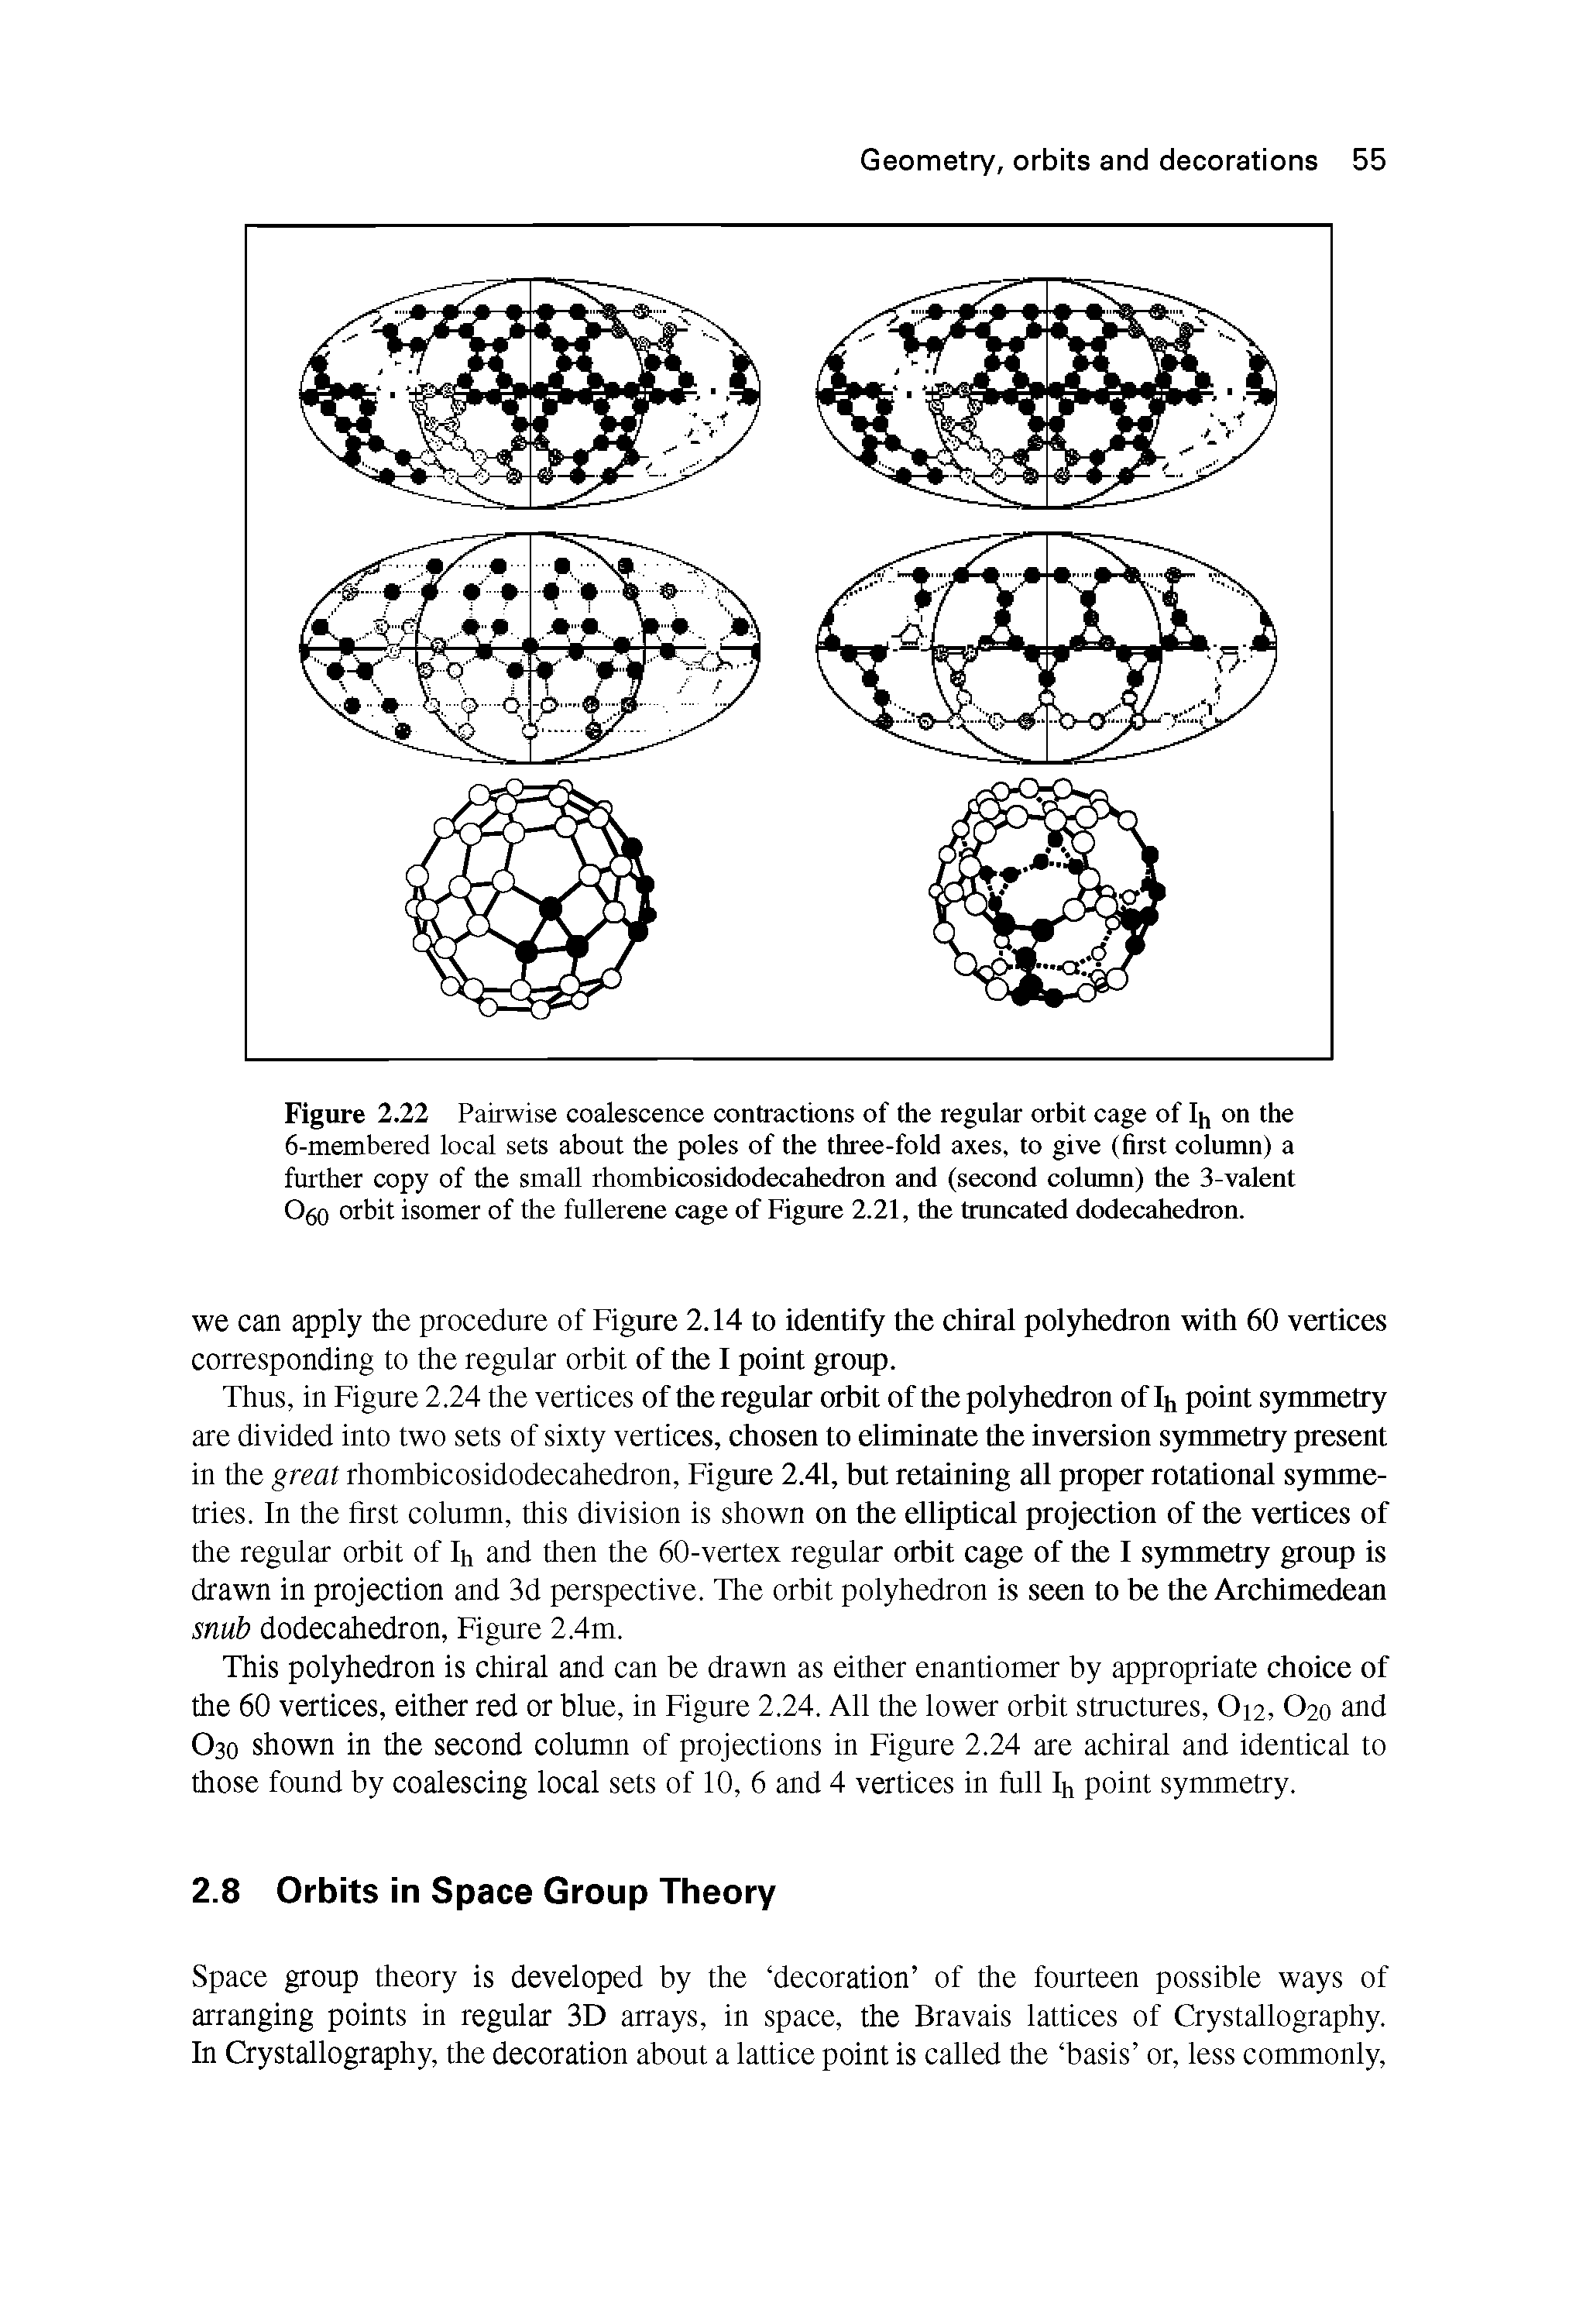 Figure 2.22 Pairwise coalescence contractions of the regular orbit cage of I[, on the 6-membered local sets about the poles of the three-fold axes, to give (first column) a further copy of the small rhombicosidodecahedron and (second column) the 3-valent 60 orbit isomer of the fullerene cage of Figure 2.21, the truncated dodecahedron.